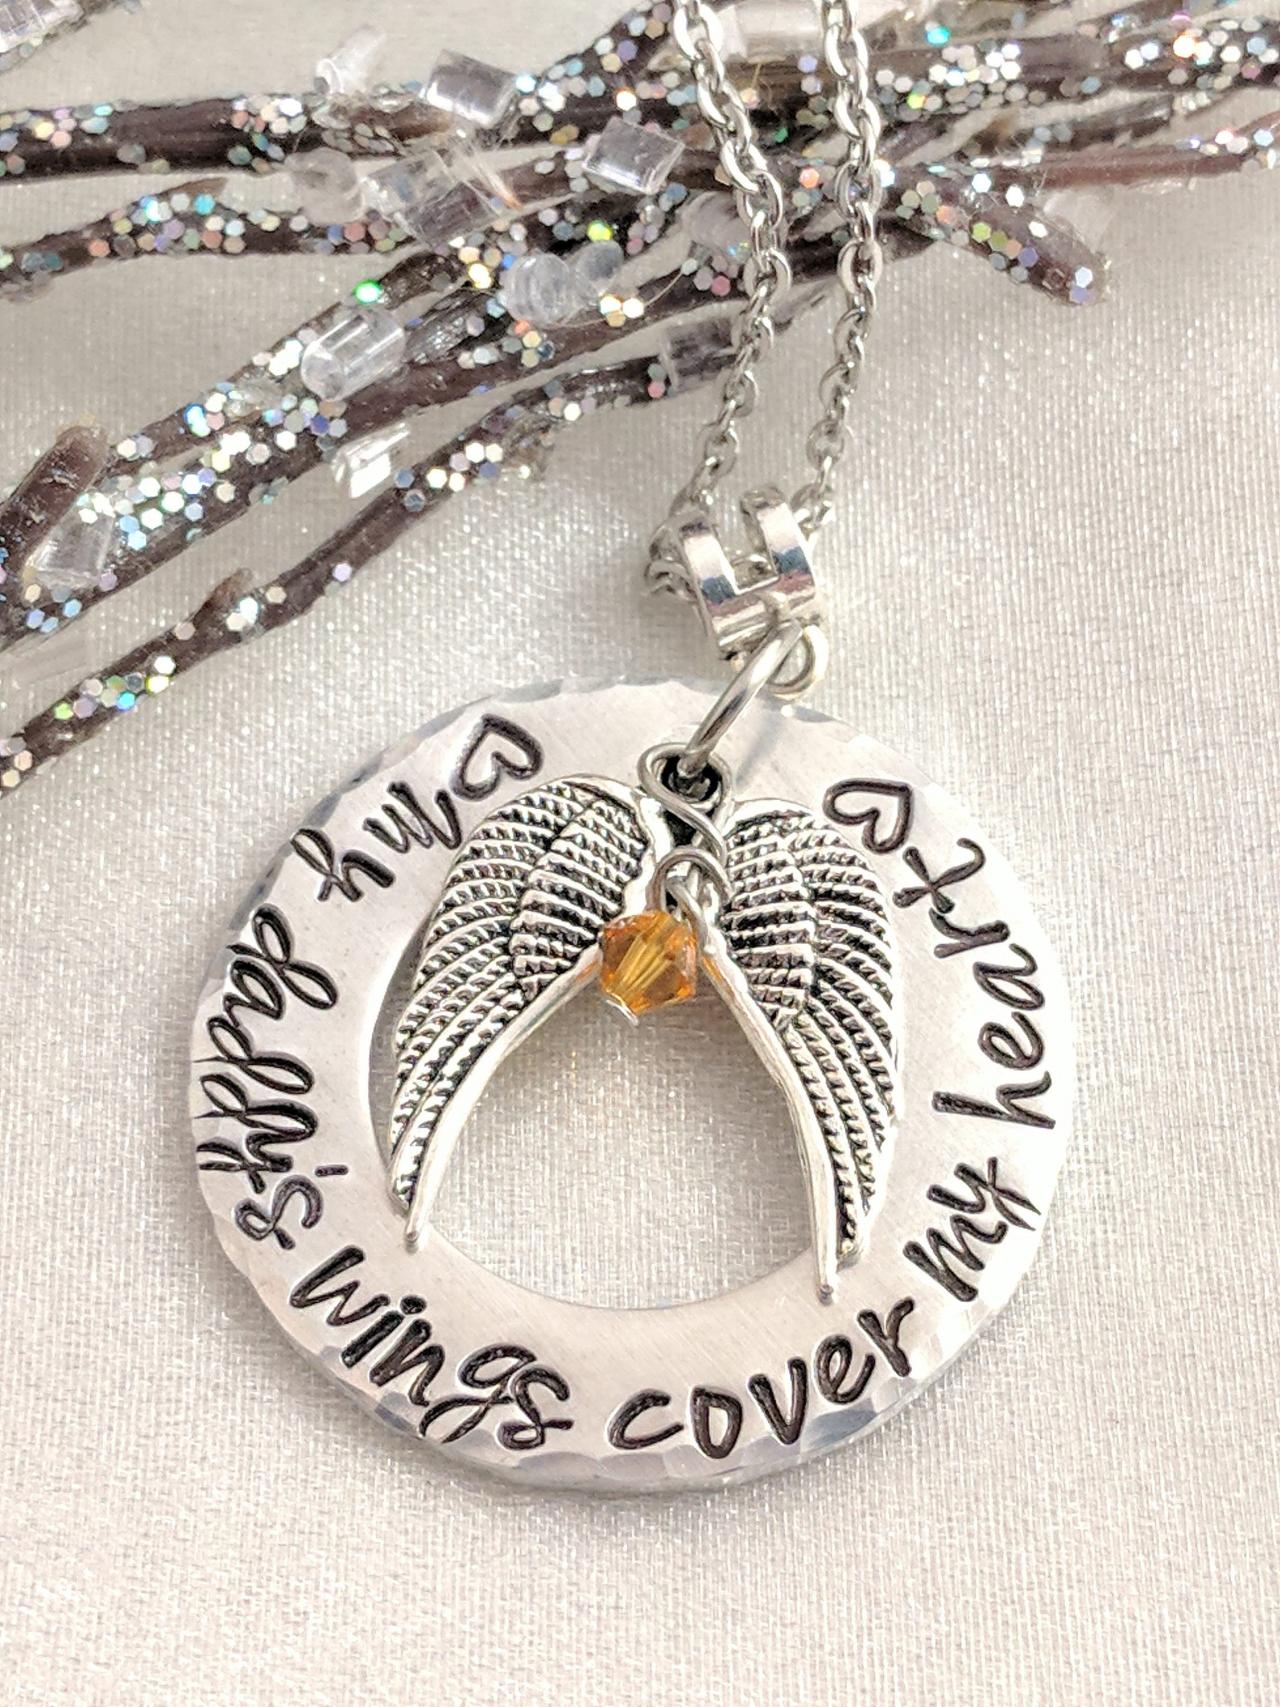 Hand Stamped Necklace Sympathy Gift - Angel Wings - Loss Of Dad - Customized Keepsake Hand Stamped Jewelry - Memorial Necklace - Remembrance